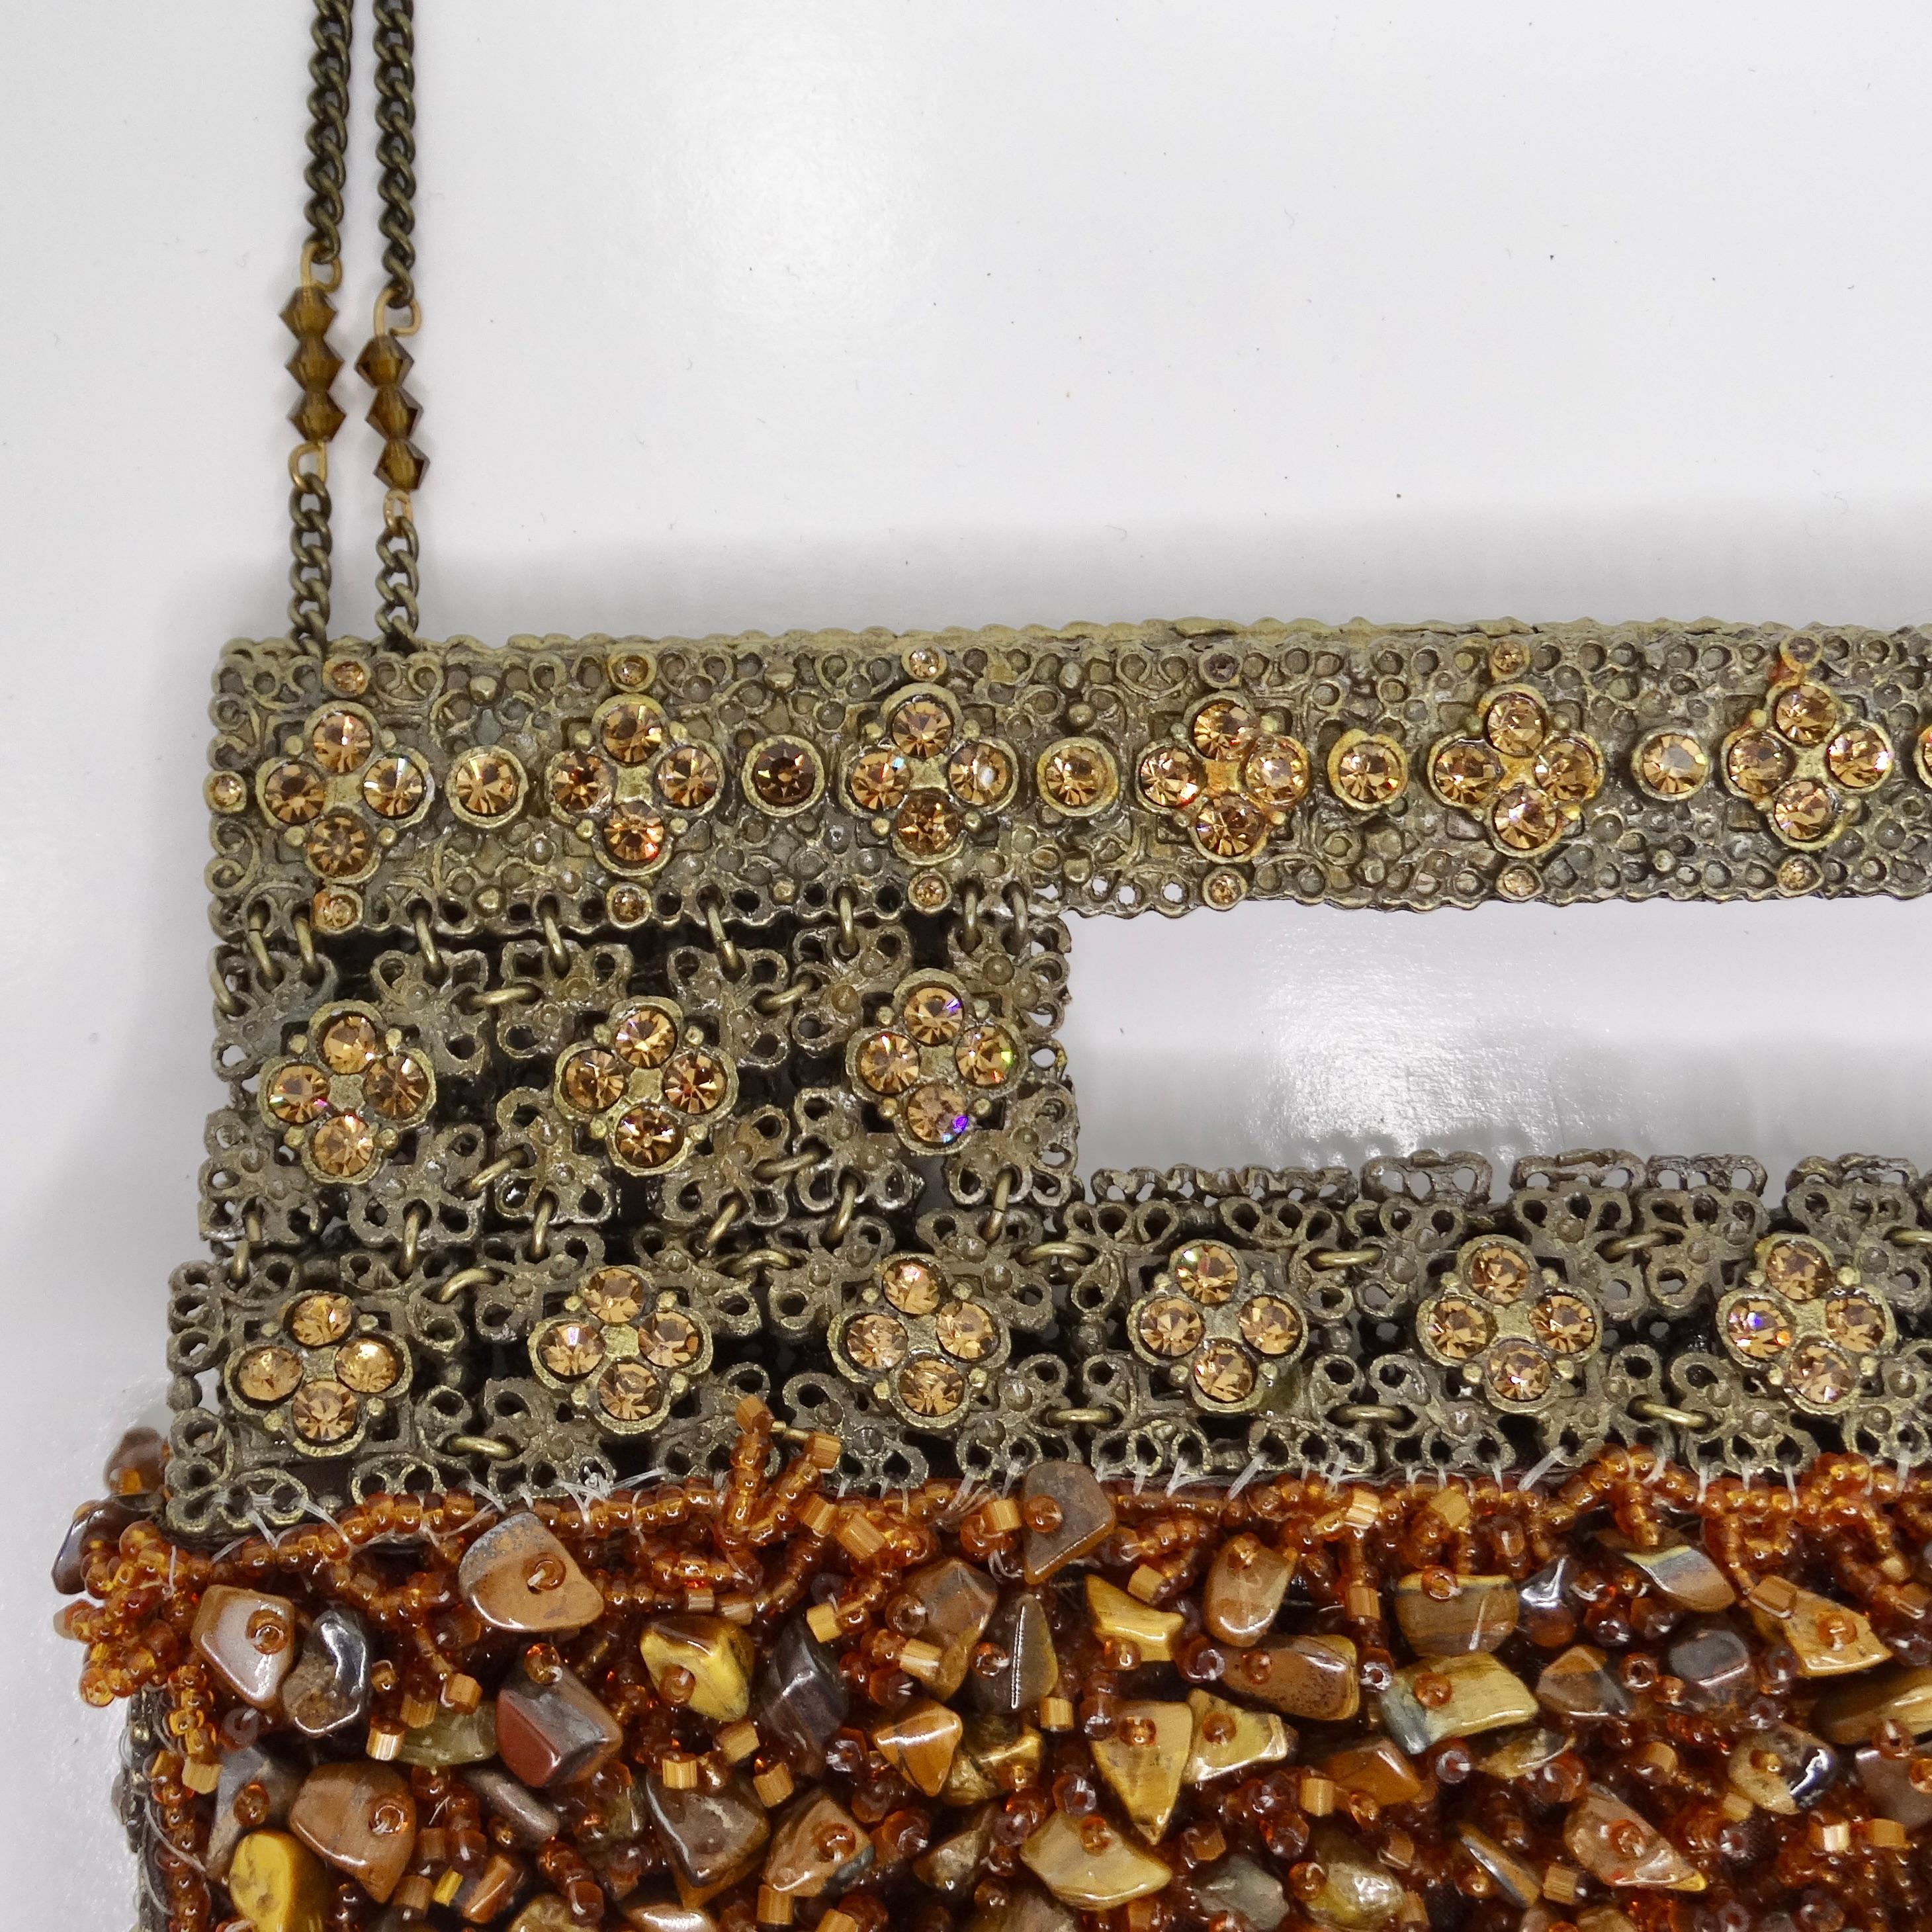 Introducing the stunning 1970s Tiger Eye Stone Swarovski Crystal Embellished Handbag, a true artisanal masterpiece that exudes luxury and glamour. Crafted from bronze-tone metal, this handbag is adorned with a plethora of intricate tiger eye stone